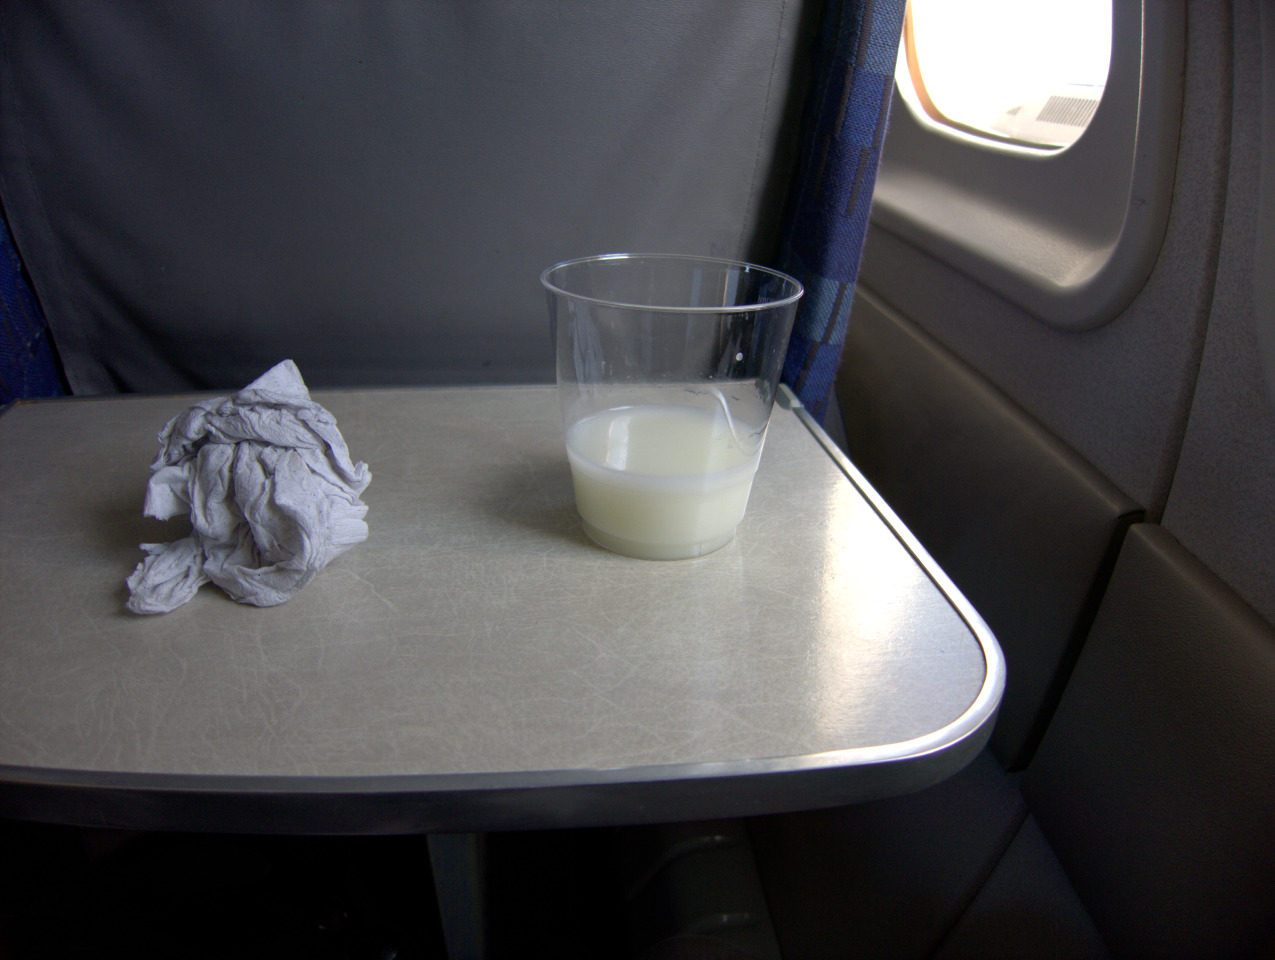 A cup of milk sitting next to a crumbled piece of paper towel on an airplane table.